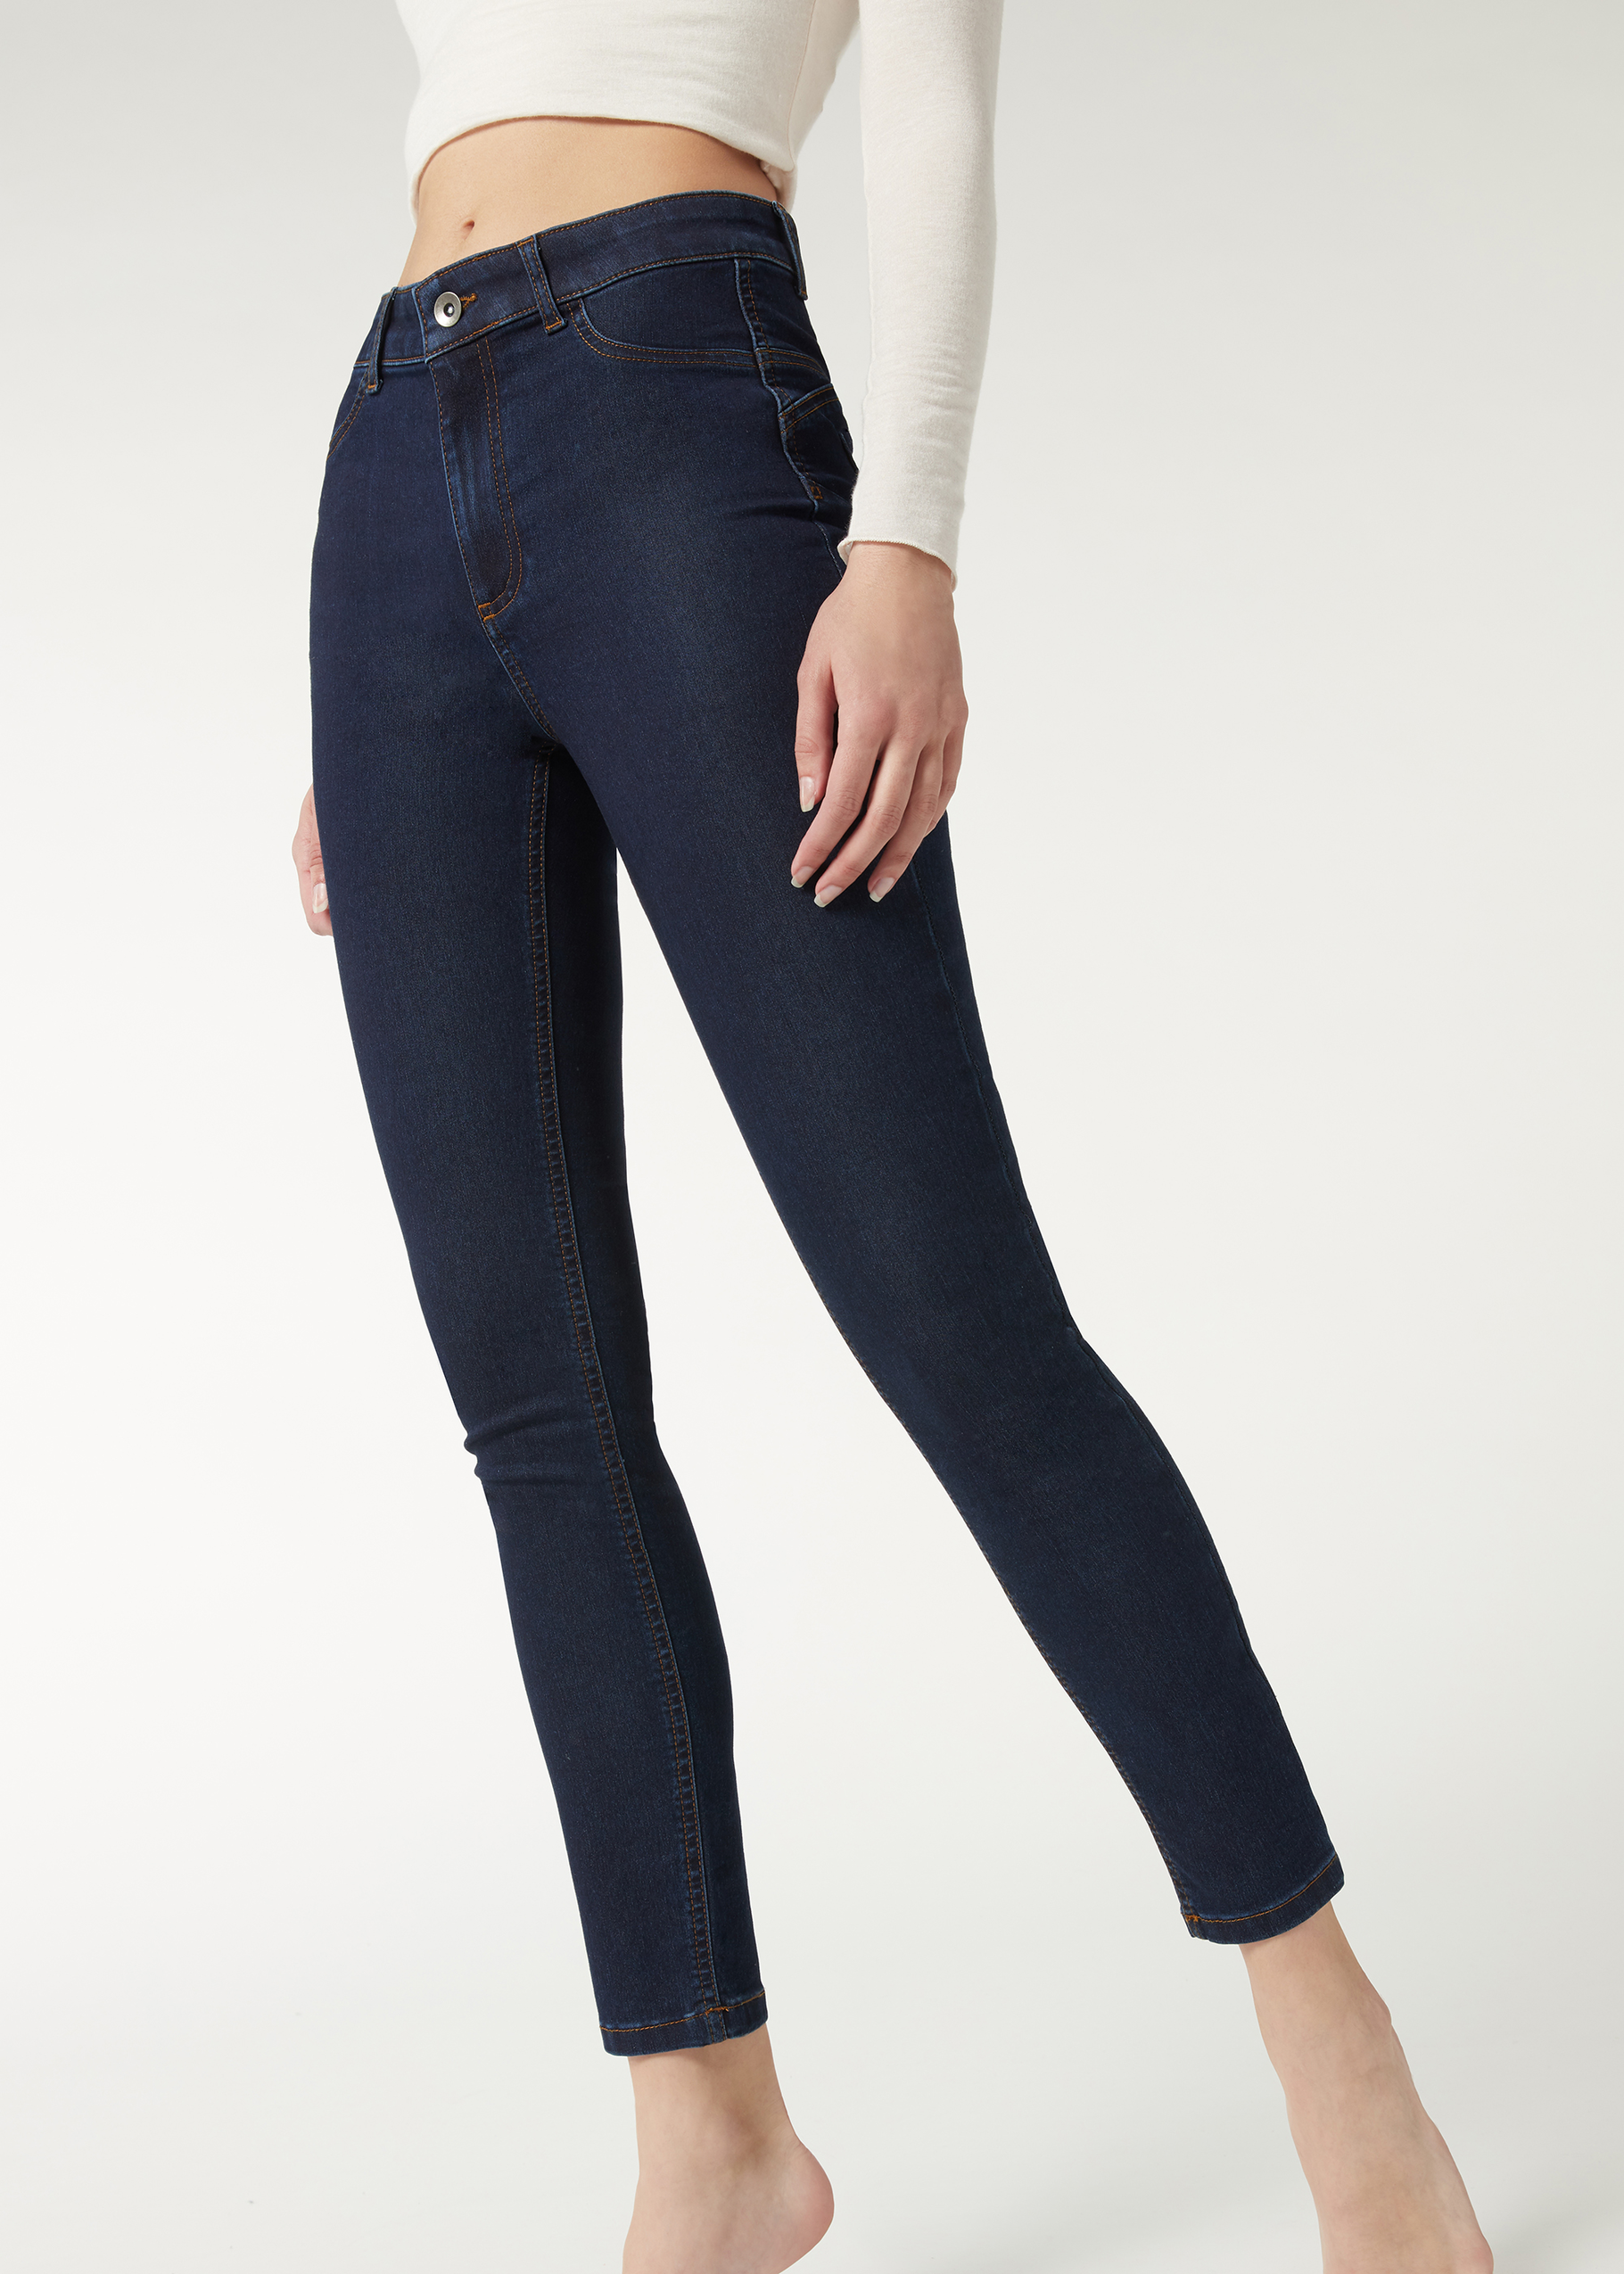 Push-up and soft touch Leggings and Jeans -